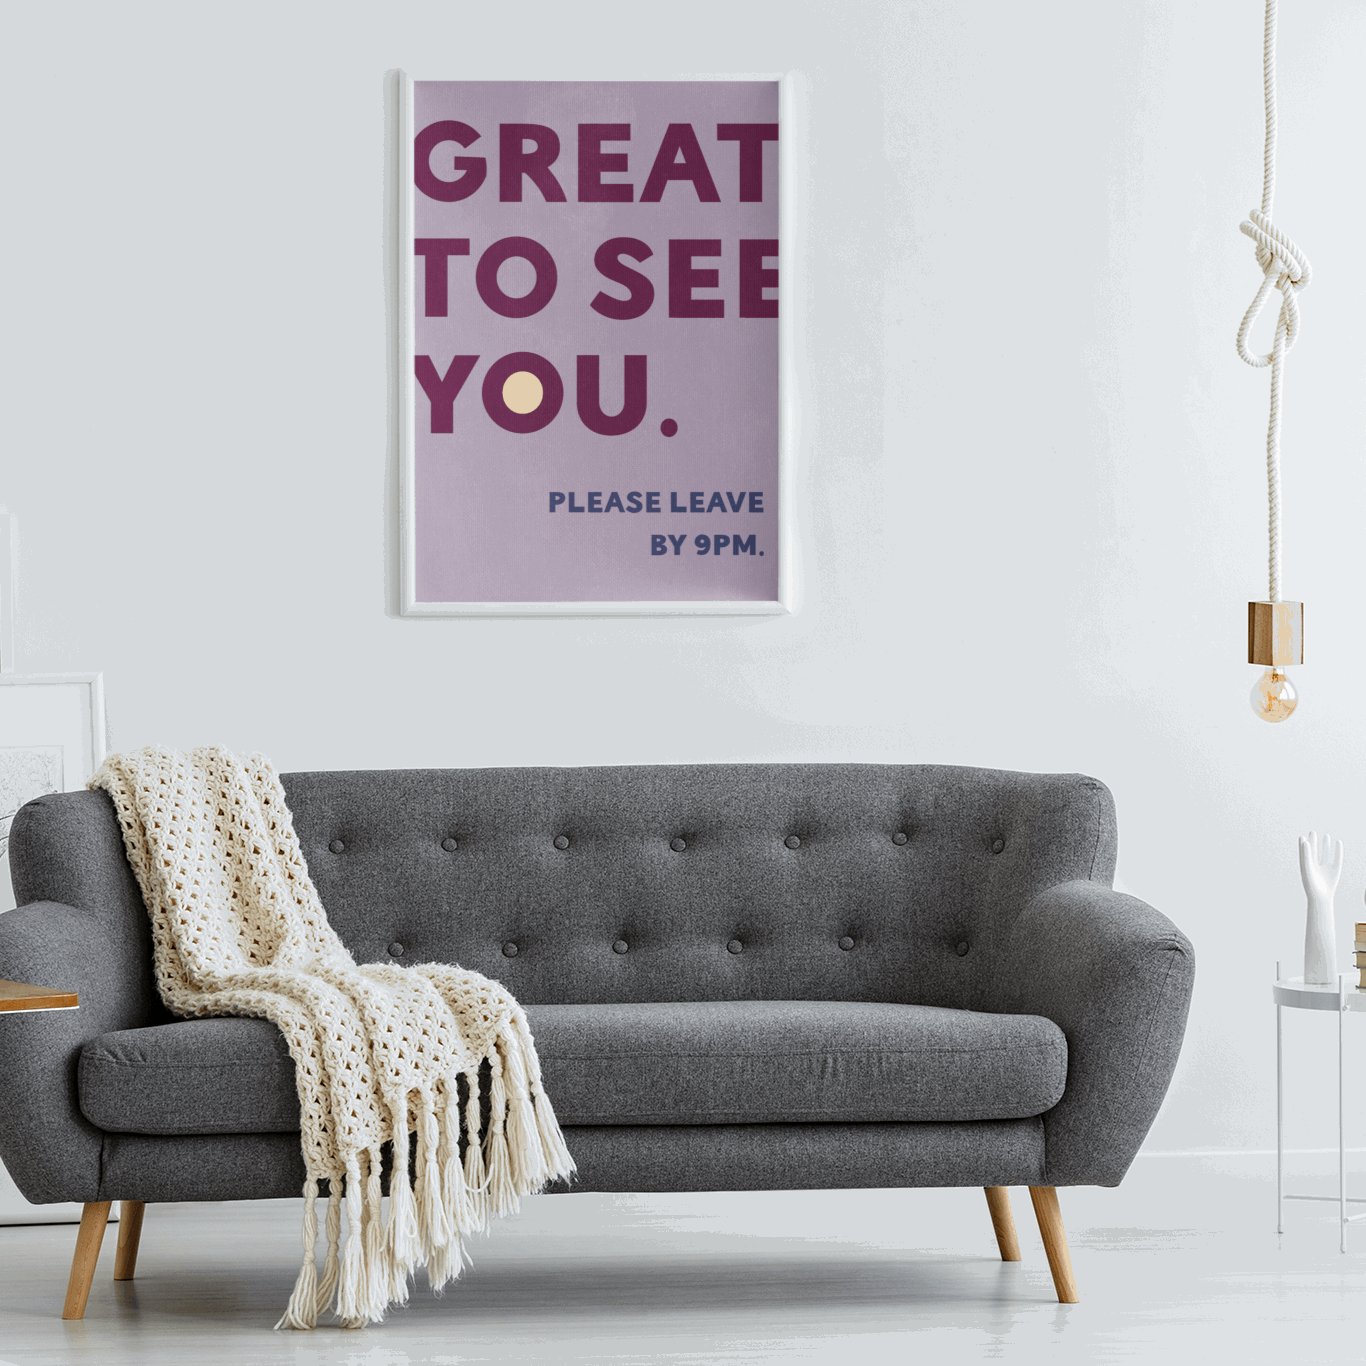 Great to see you - Poster